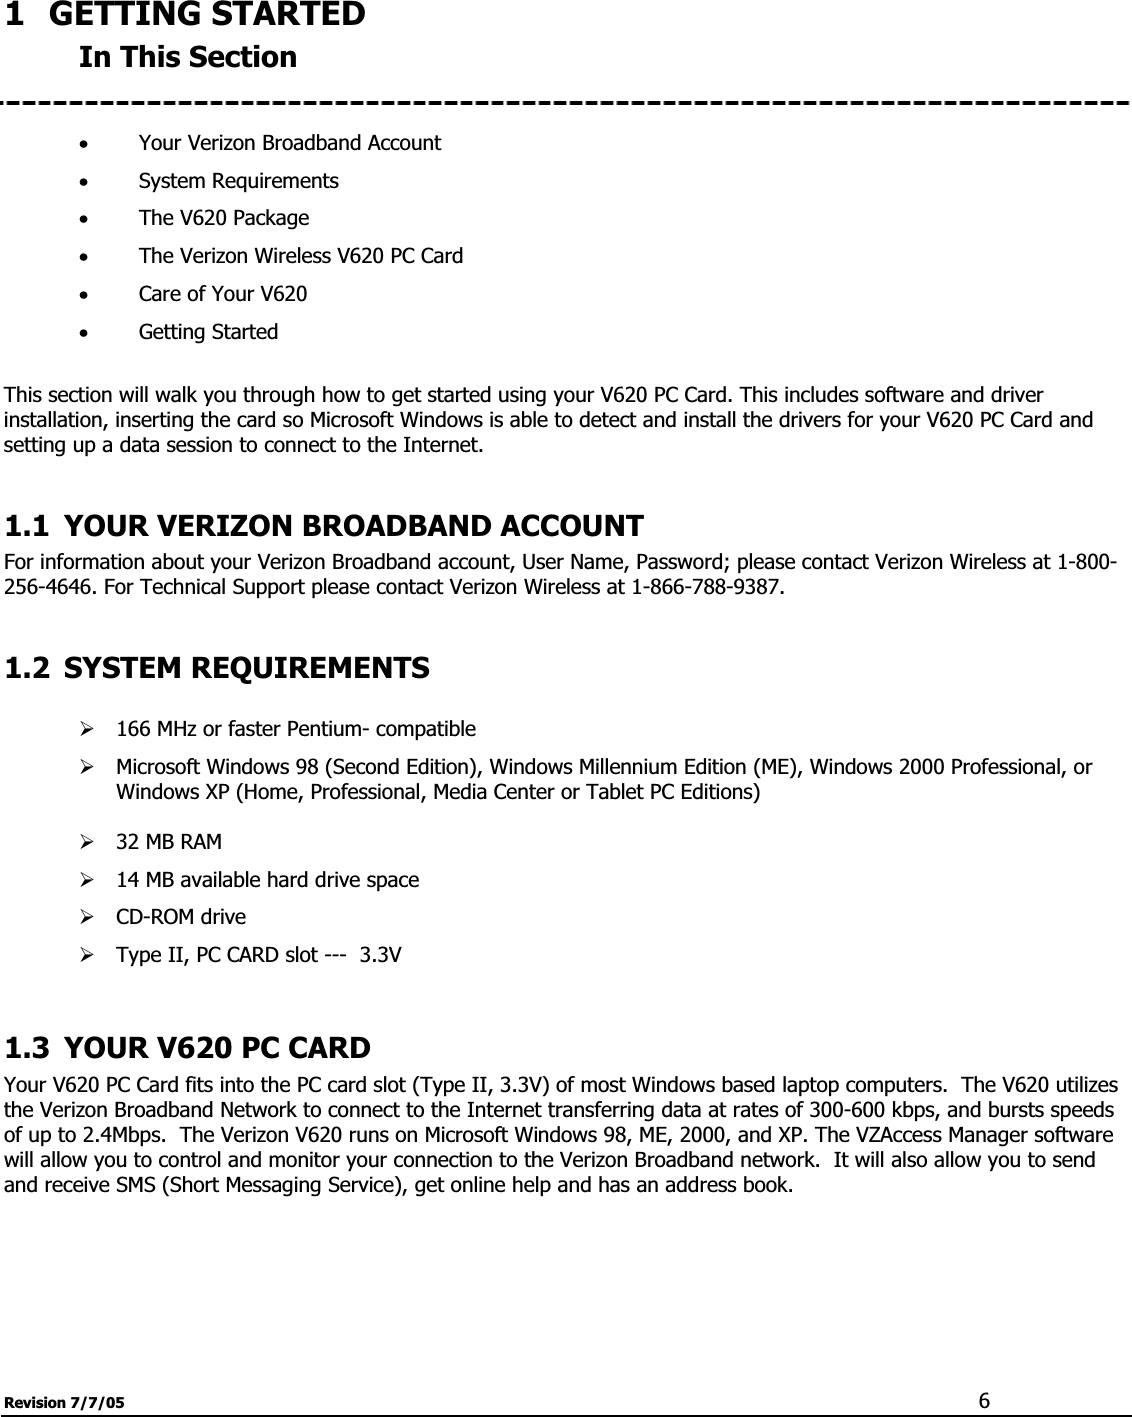 Revision 7/7/05  61 GETTING STARTED In This Section xYour Verizon Broadband Account xSystem Requirements xThe V620 Package xThe Verizon Wireless V620 PC Card xCare of Your V620 xGetting Started This section will walk you through how to get started using your V620 PC Card. This includes software and driver installation, inserting the card so Microsoft Windows is able to detect and install the drivers for your V620 PC Card and setting up a data session to connect to the Internet. 1.1 YOUR VERIZON BROADBAND ACCOUNT For information about your Verizon Broadband account, User Name, Password; please contact Verizon Wireless at 1-800-256-4646. For Technical Support please contact Verizon Wireless at 1-866-788-9387. 1.2 SYSTEM REQUIREMENTS ¾166 MHz or faster Pentium- compatible ¾Microsoft Windows 98 (Second Edition), Windows Millennium Edition (ME), Windows 2000 Professional, or Windows XP (Home, Professional, Media Center or Tablet PC Editions) ¾32 MB RAM¾14 MB available hard drive space ¾CD-ROM drive ¾Type II, PC CARD slot ---  3.3V 1.3 YOUR V620 PC CARD Your V620 PC Card fits into the PC card slot (Type II, 3.3V) of most Windows based laptop computers.  The V620 utilizes the Verizon Broadband Network to connect to the Internet transferring data at rates of 300-600 kbps, and bursts speeds of up to 2.4Mbps.  The Verizon V620 runs on Microsoft Windows 98, ME, 2000, and XP. The VZAccess Manager software will allow you to control and monitor your connection to the Verizon Broadband network.  It will also allow you to send and receive SMS (Short Messaging Service), get online help and has an address book. 